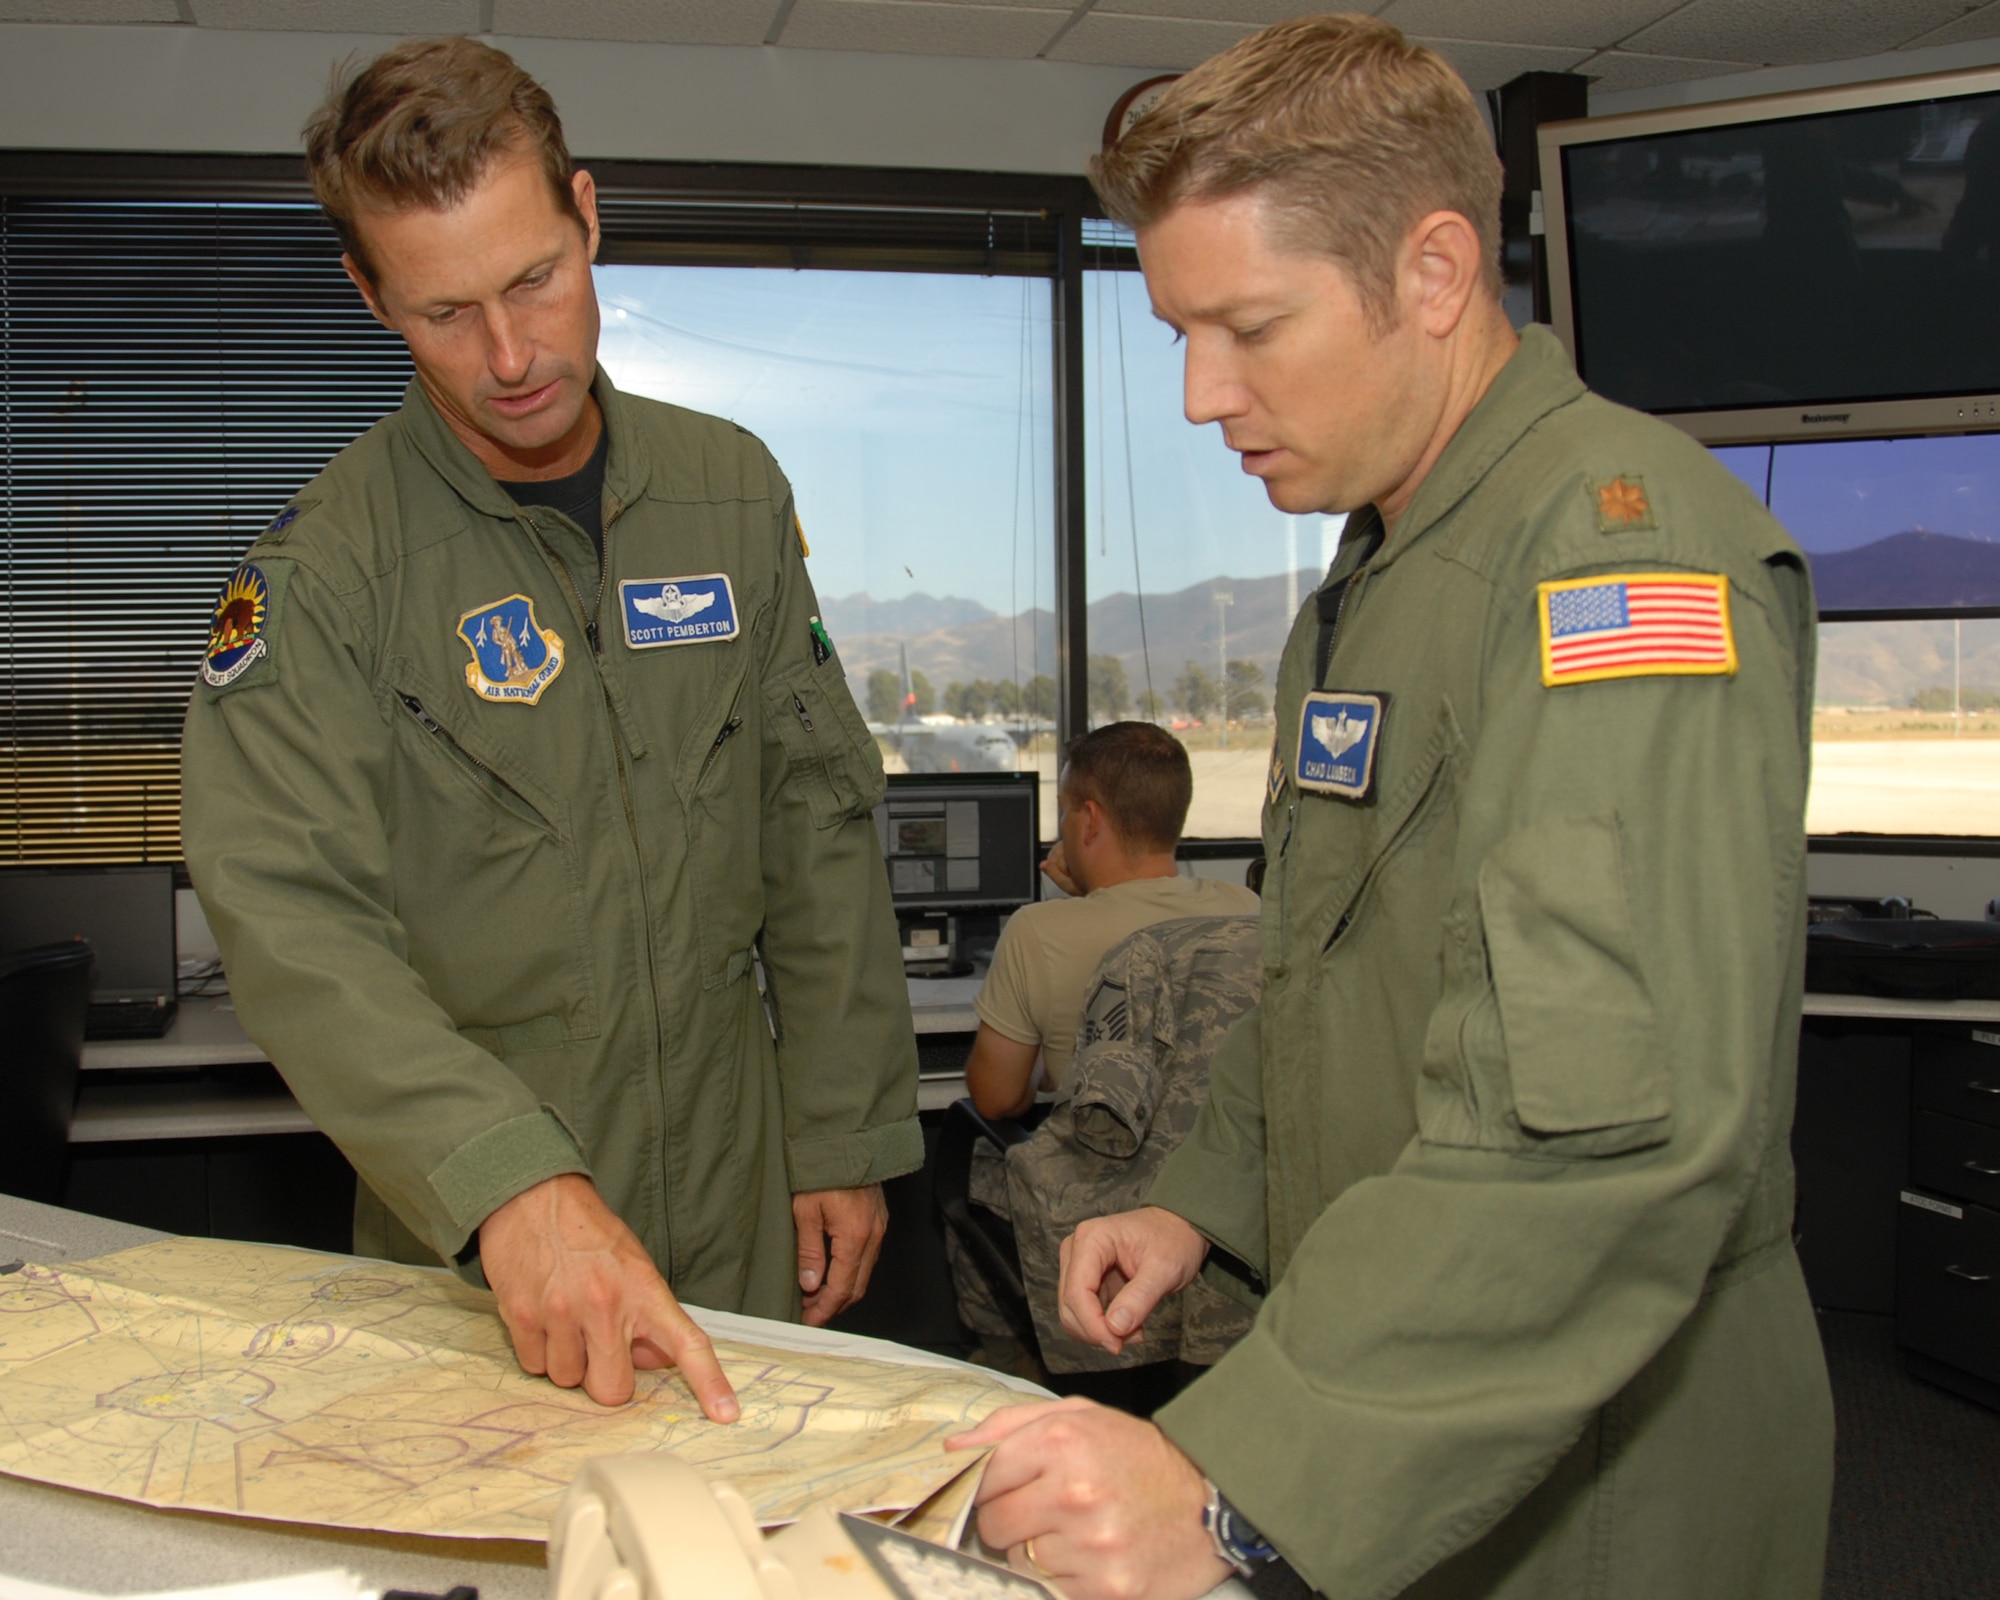 Lt. Col. Scott Pemberton, (left) MAFFS pilot and Maj Chad Lunbeck, (right) MAFFS mission commander locate active fires in the Kern County area on September 12, 2011 at Channel Islands Air National Guard Station, Port Hueneme Calif. (U.S. Air Force photo by SrA Nicholas Carzis.)